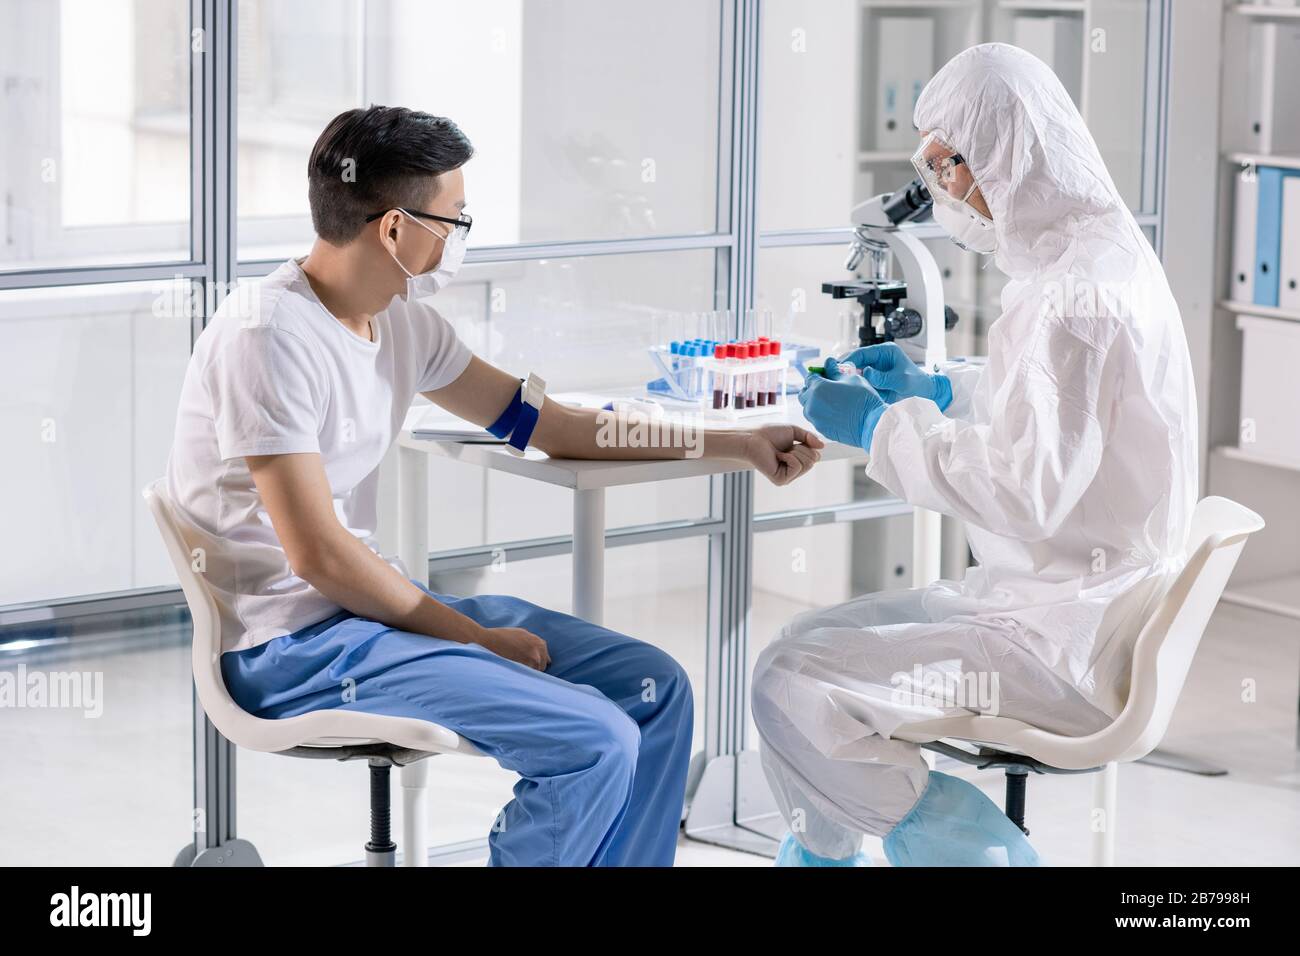 Worker of medical laboratory in protective workwear going to take blood of young Chinese man to diagnose disease Stock Photo